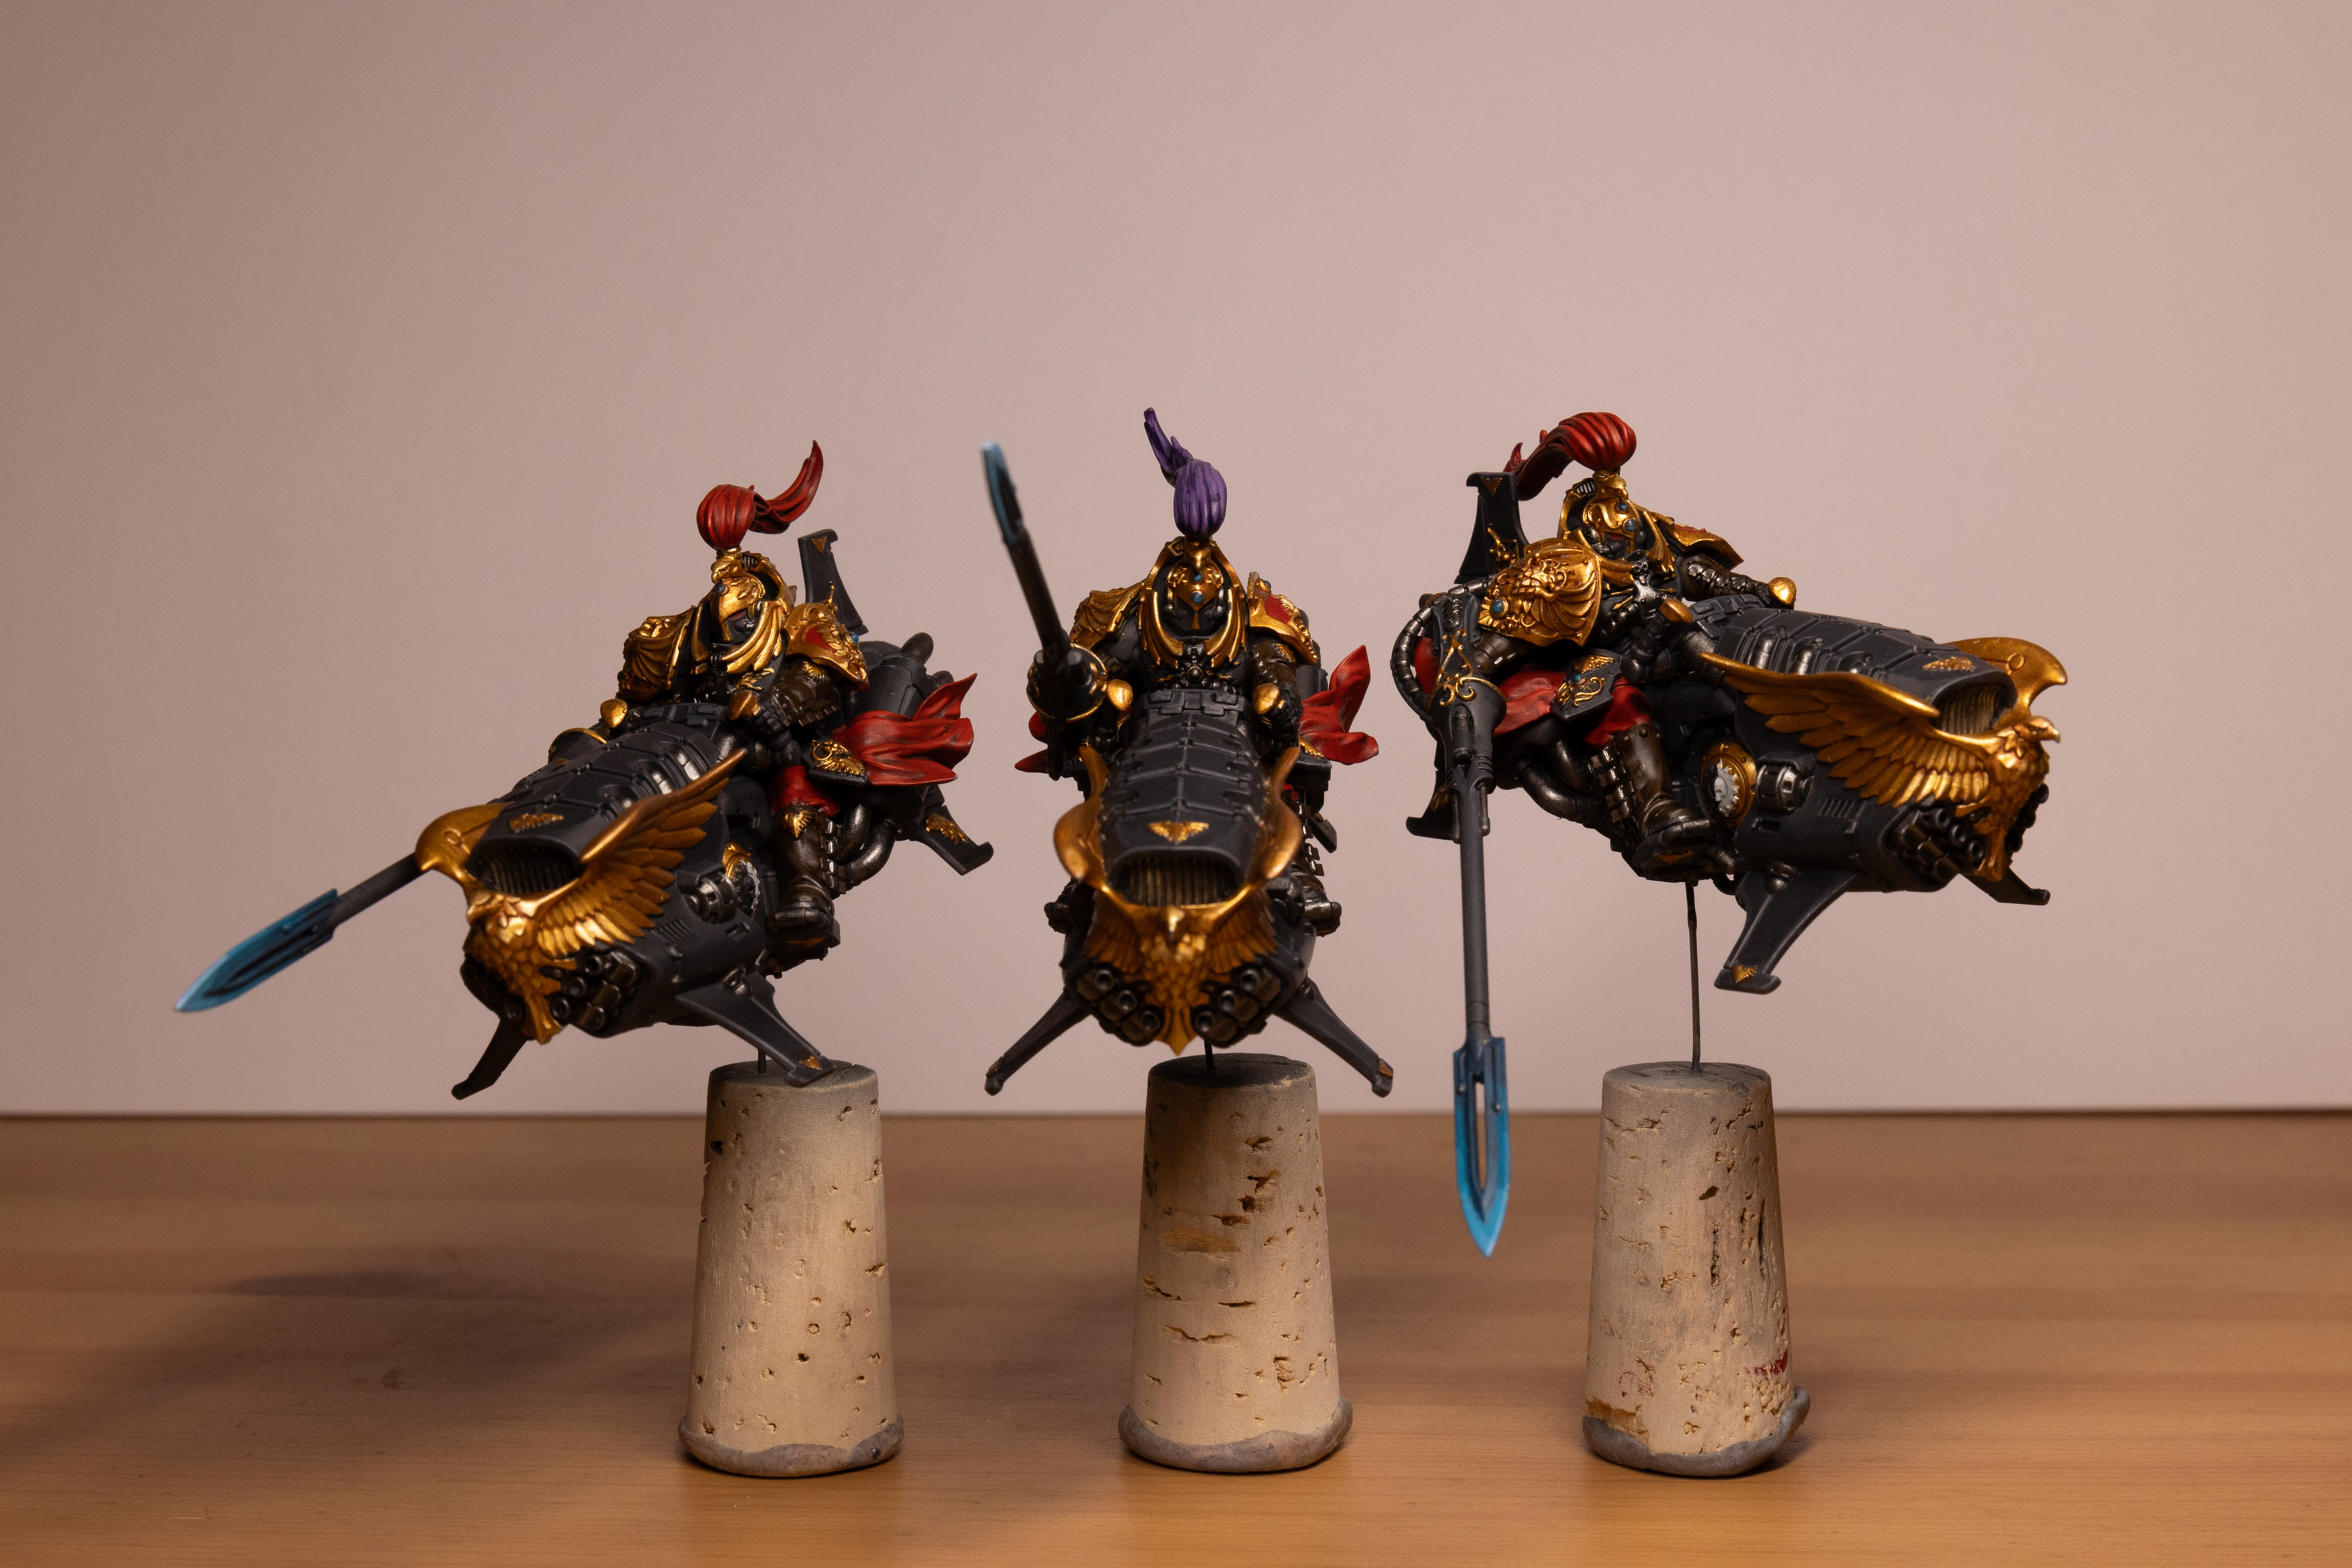 Three Warhammer 40k Custodian Vertus Praetors in the Shadowkeepers color scheme. They are three armoured warriors on large jet bikes painted in black armour with gold gold trim and red accents. The front of each bike features a large golden eagle and each warrior is holding a long lance with a glowing electric blue tip. The central warrior has a purple head plume. All three models are mounted on metal sicks and corks.